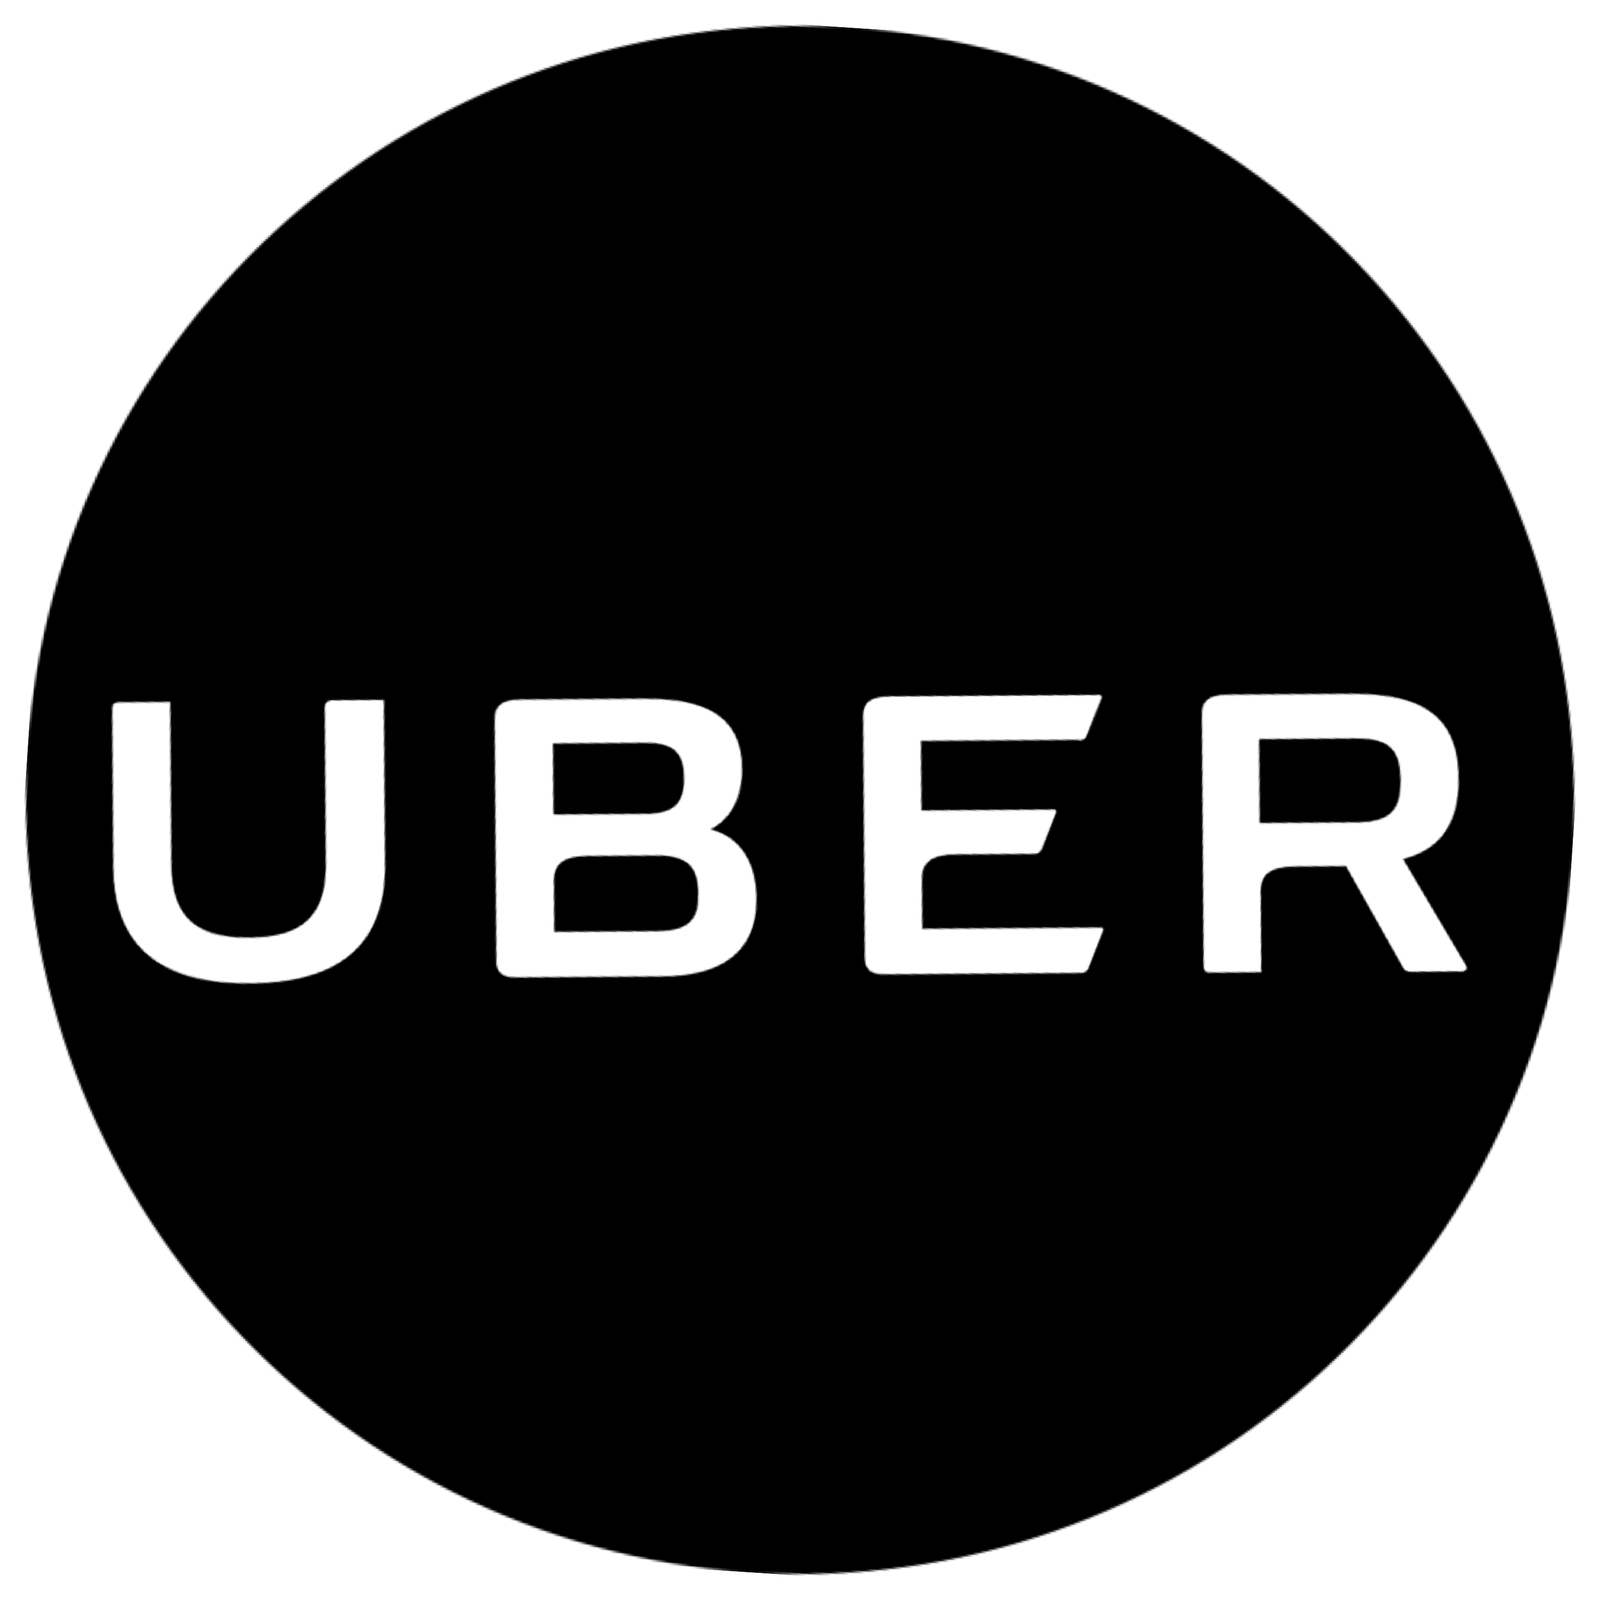 Start Driving with Uber to earn more